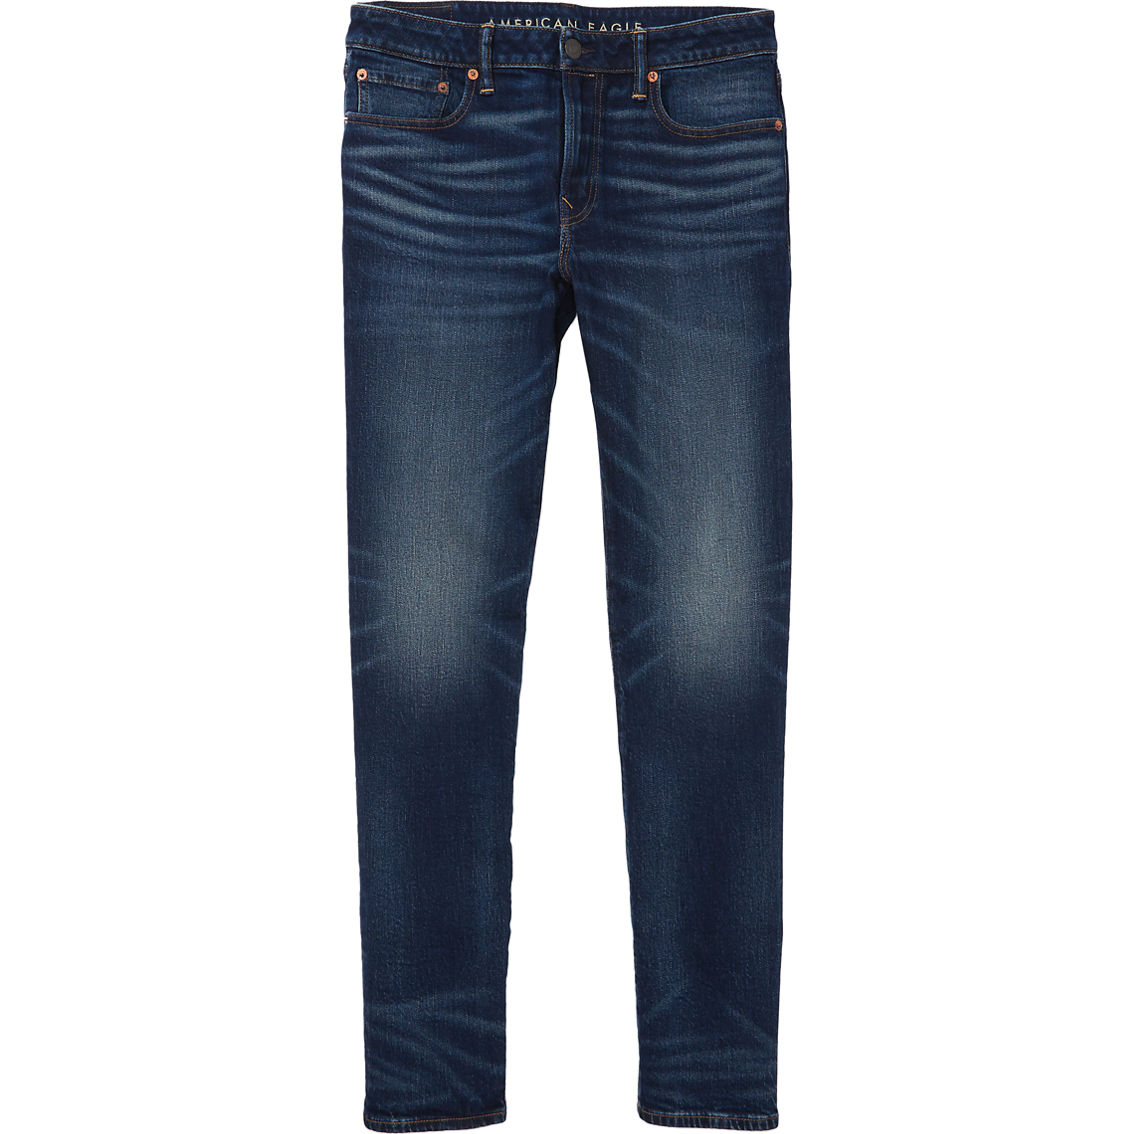 American Eagle Airflex+ Slim Straight Jeans | Jeans | Clothing ...